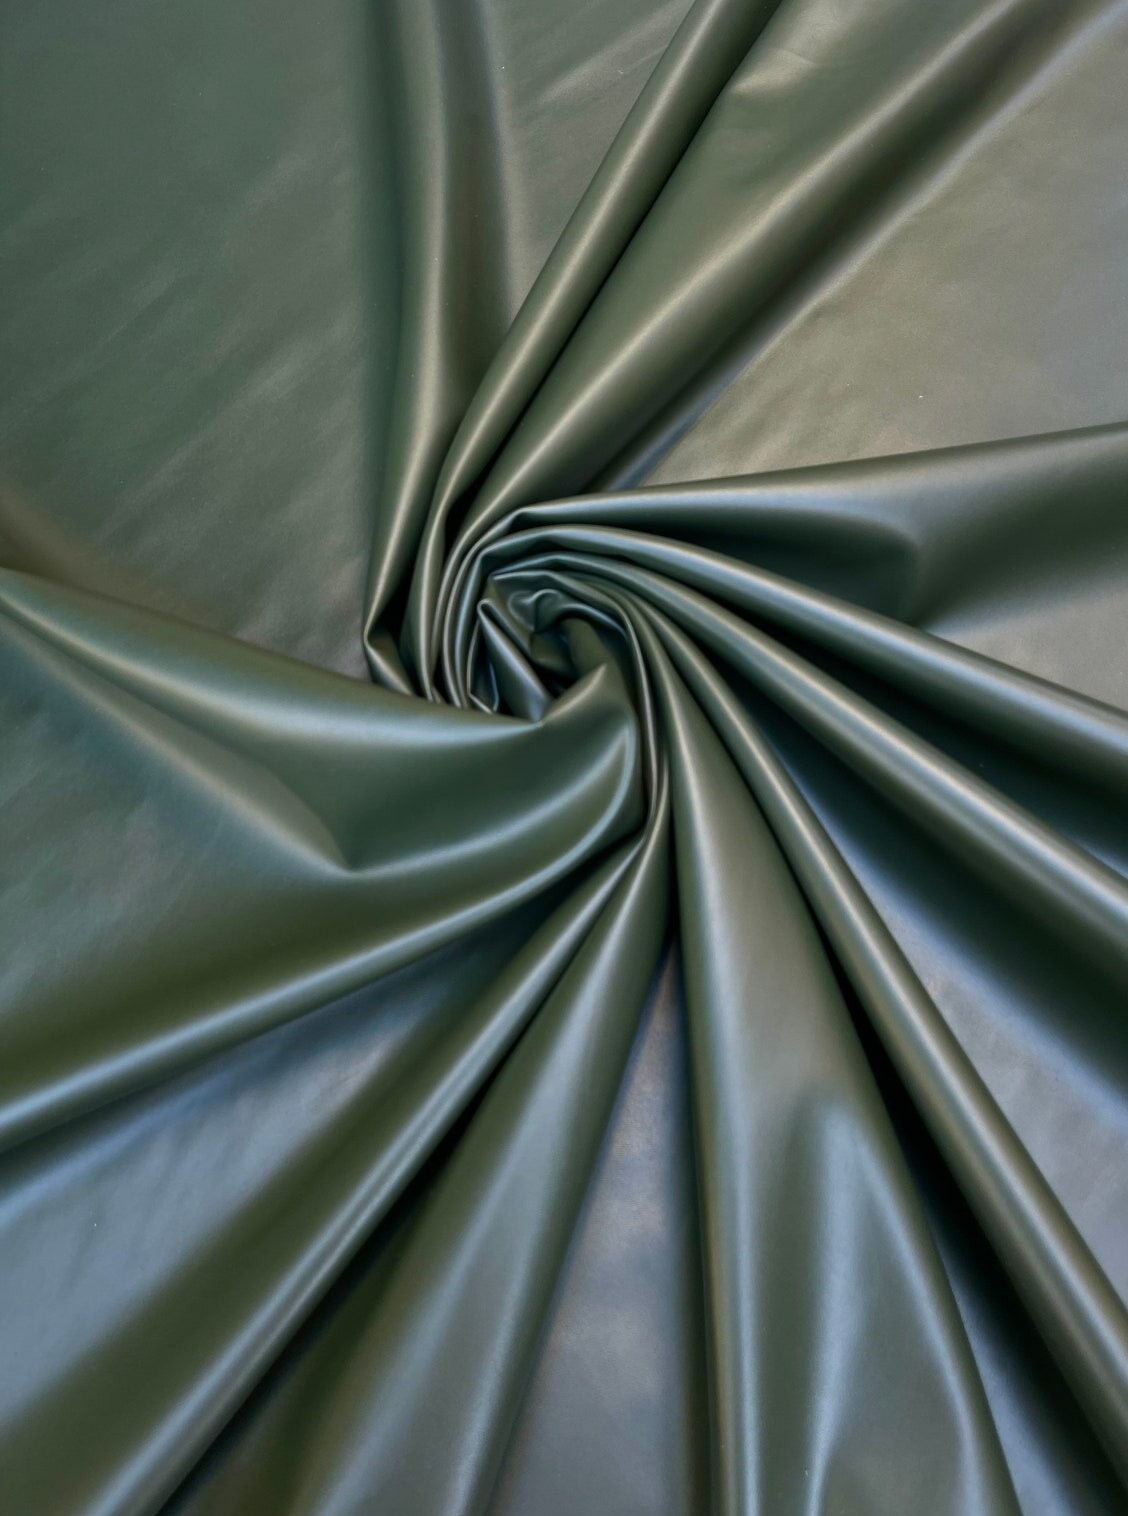 olive green stretch faux leather, olive stretch pleather, olive green stretch soft vinyl, olive green stretch vinyl, faux leather stretch for clothing, Faux Leather for jackets, Faux Leather for bags, Faux Leather on discount, Faux Leather on sale, premium Faux Leather, green Faux Leather, light green Faux Leather, Faux Leather for tops, Faux Leather for leggings